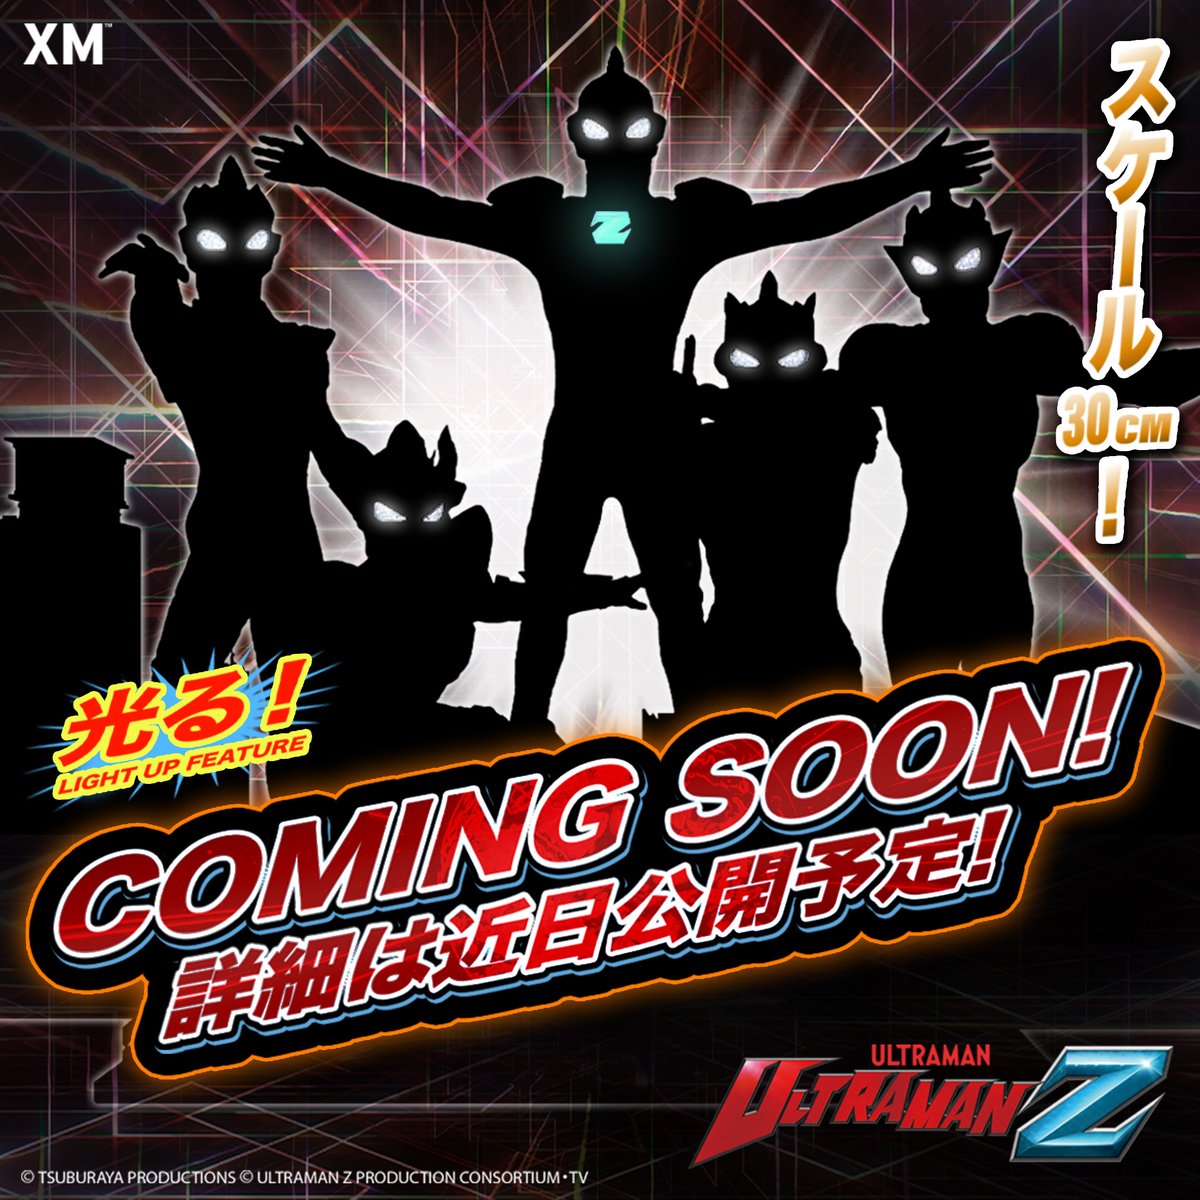 COMING SOON
Ultraman Z in his original form will be joined by his Ultra Fusion Forms! More information will be revealed in due time. 

Join the interest list to get notified on Ultraman Z Ultra Fusion Forms news: bit.ly/ultraman-z-ult…

#xmstudios #tsuburayaproductions #ULTRAMAN